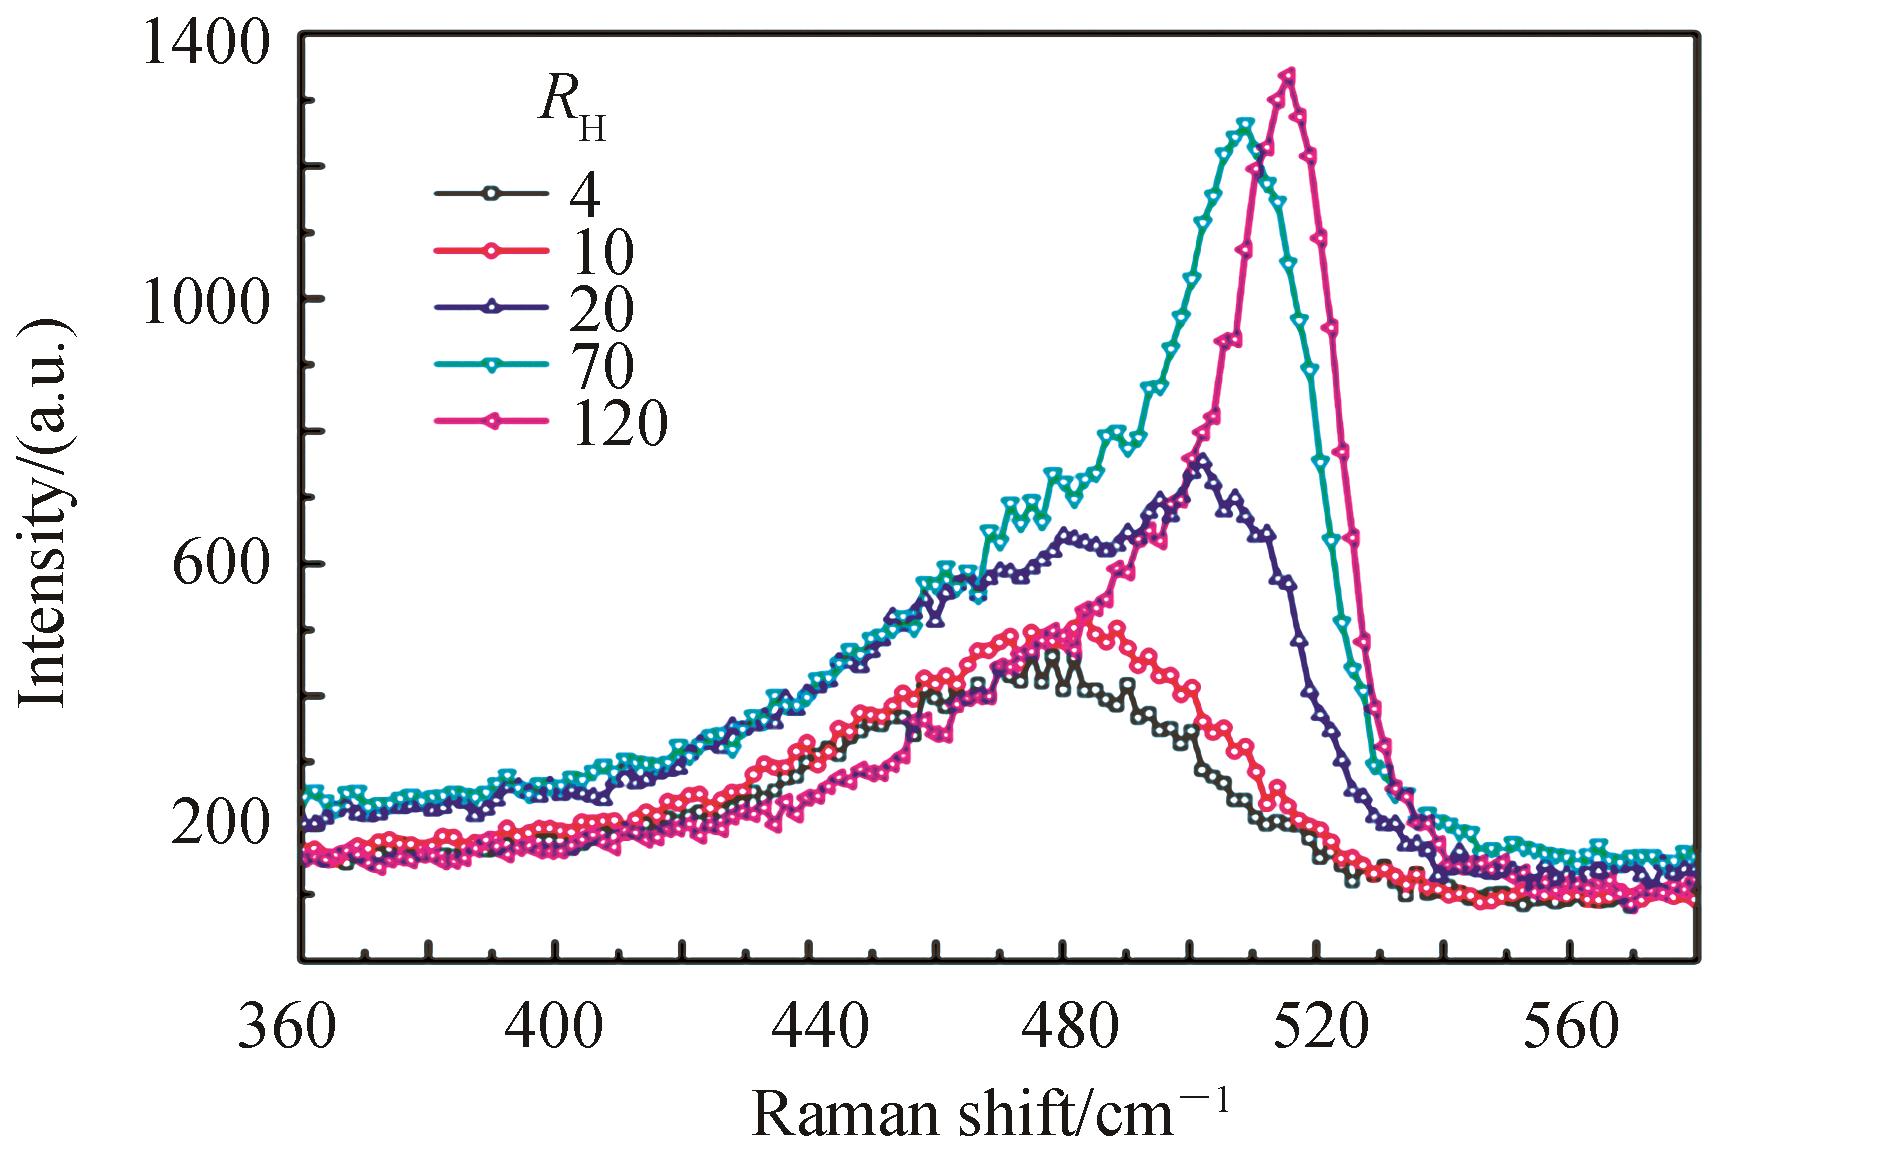 Raman spectra of i-a-Si:H deposited by different hydrogen dilution ratio